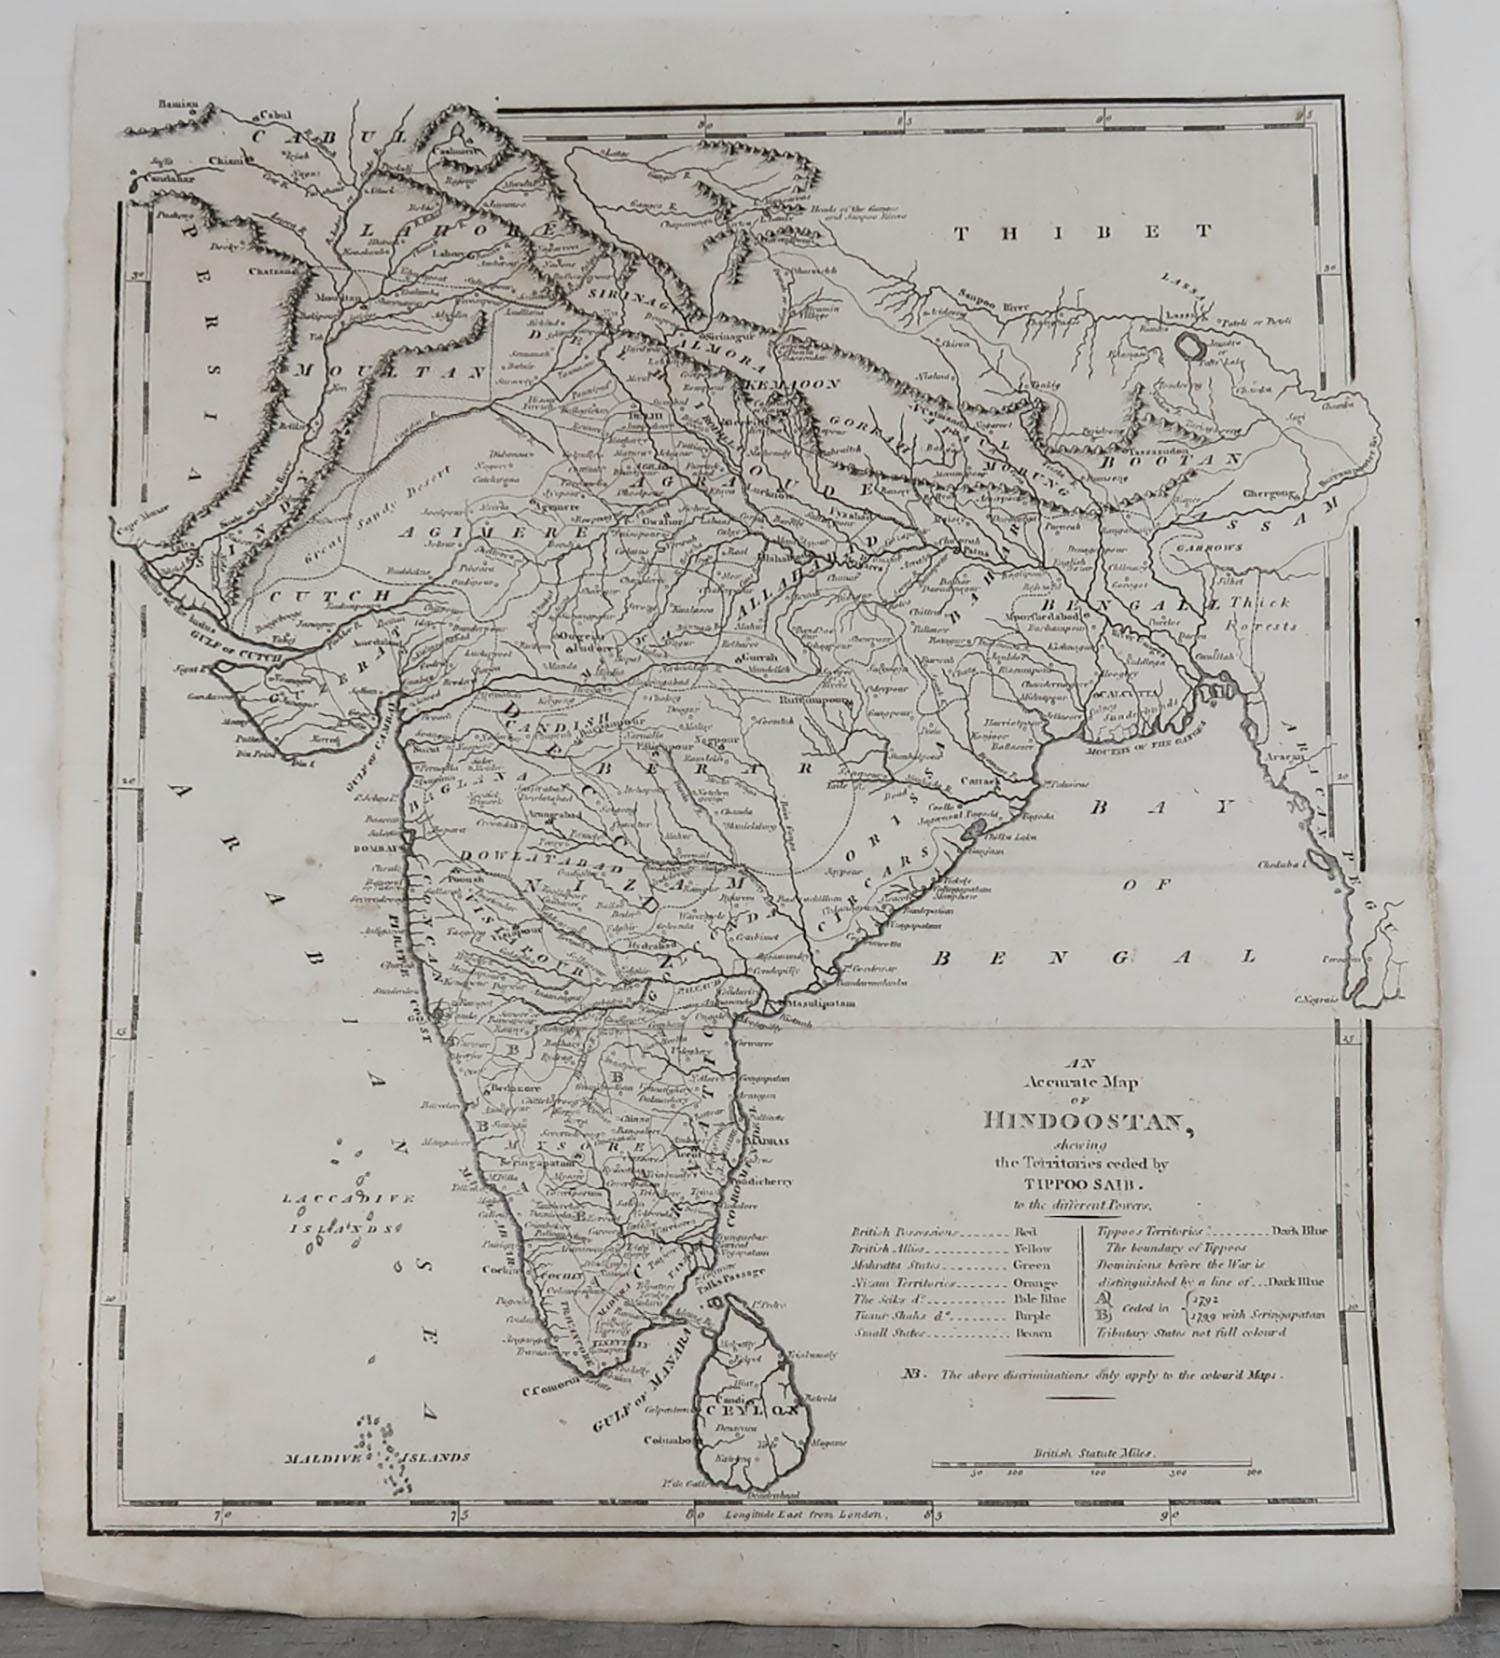 Super map of India

Copper plate engraving 

Published, circa 1820.

Unframed.

